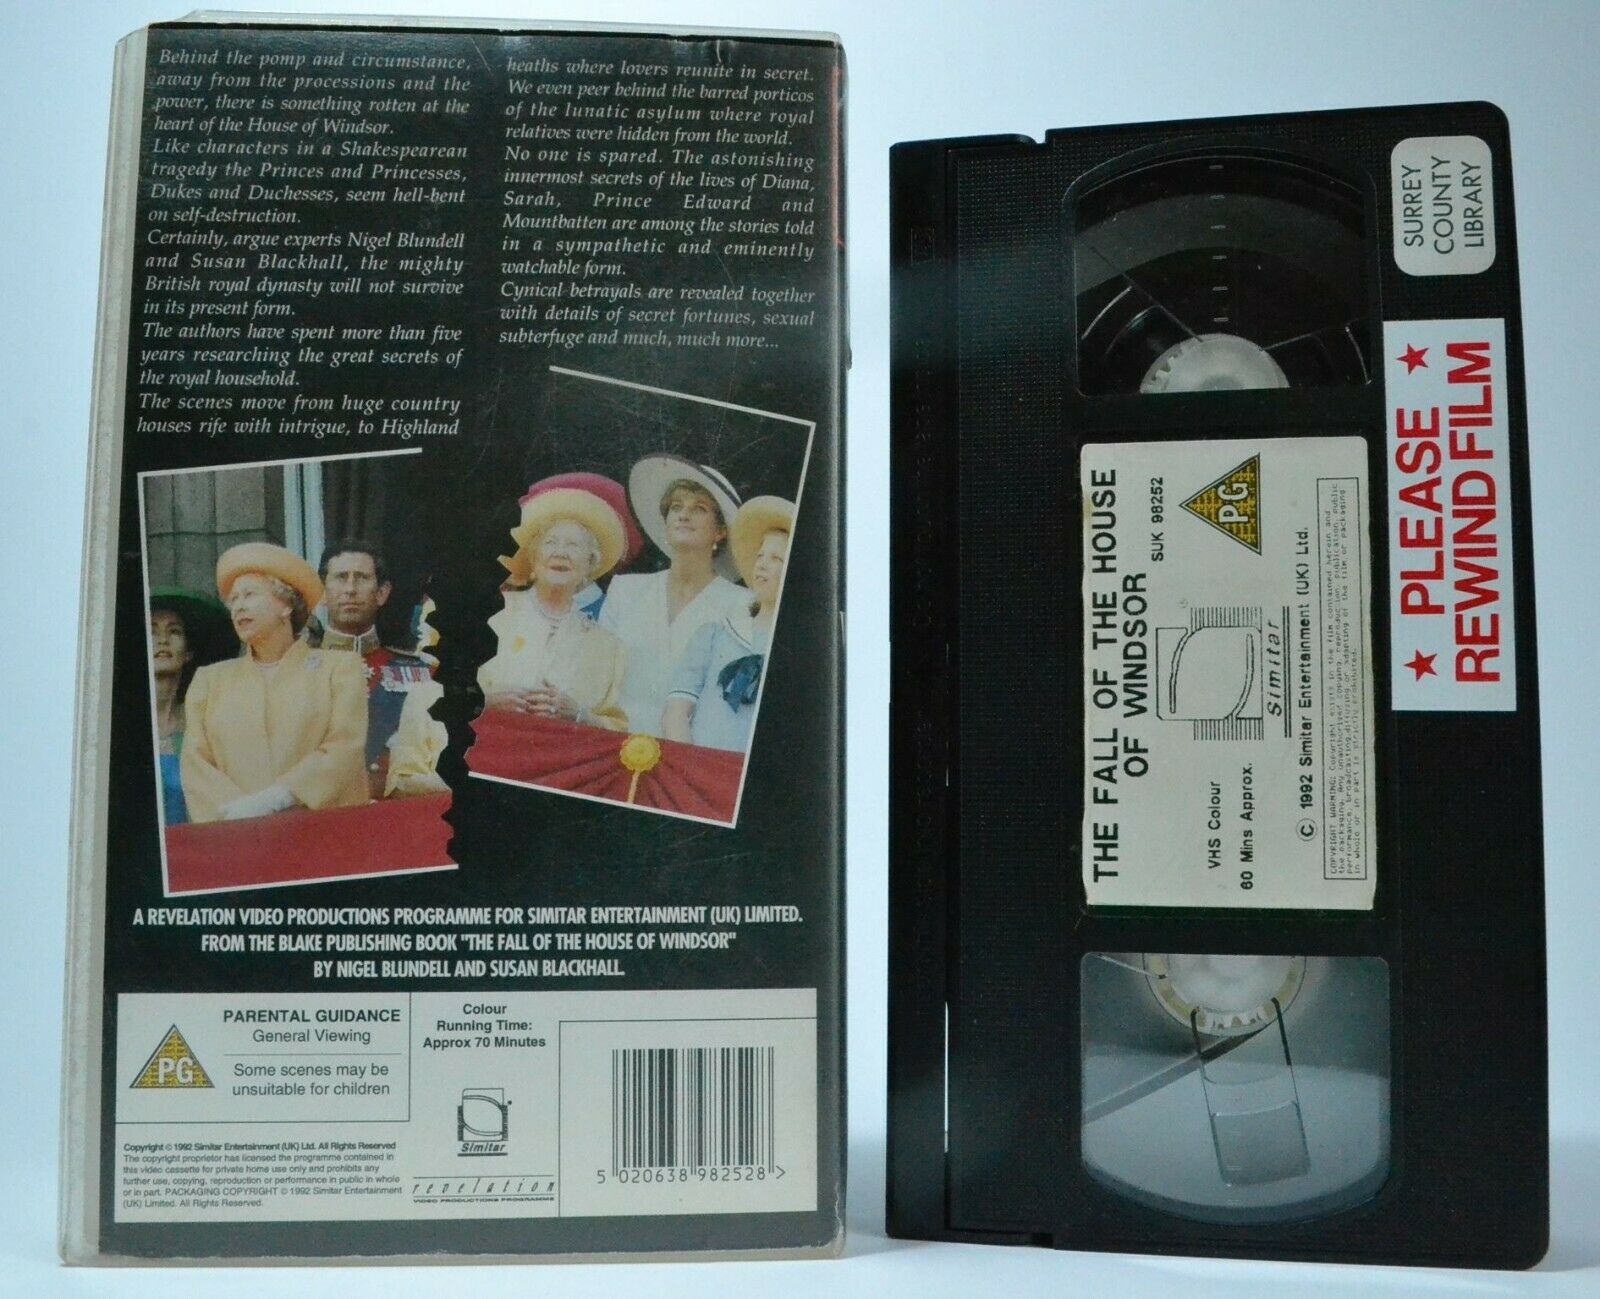 The Fall Of The House Of Windsor [Documentary] Royal Dynasty - Pal VHS-